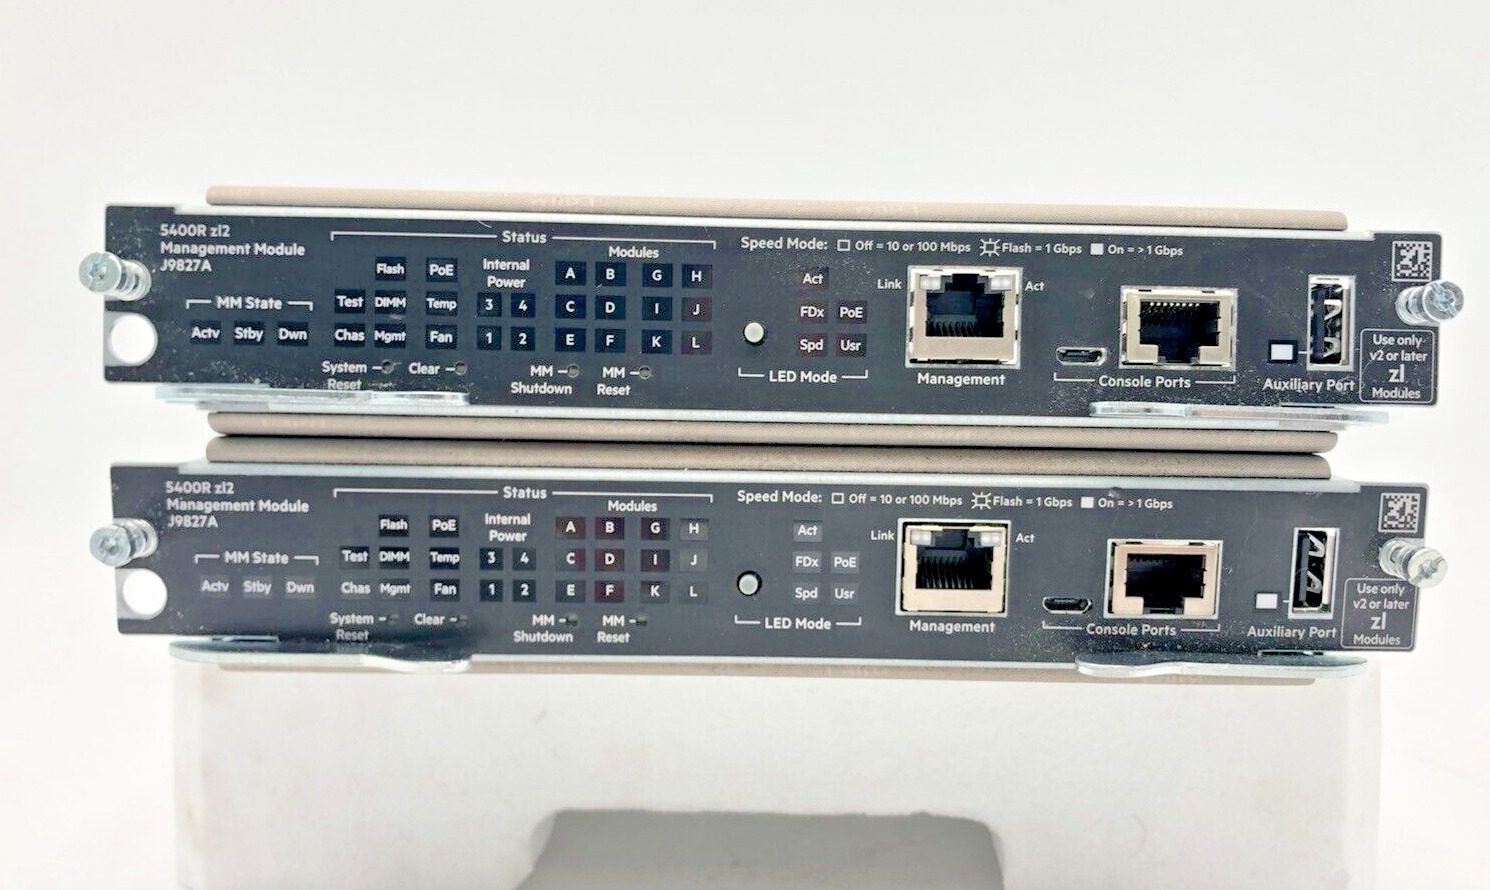 LOT OF (2) HPE Aruba J9827A 5400R zl2 Management Module TESTED